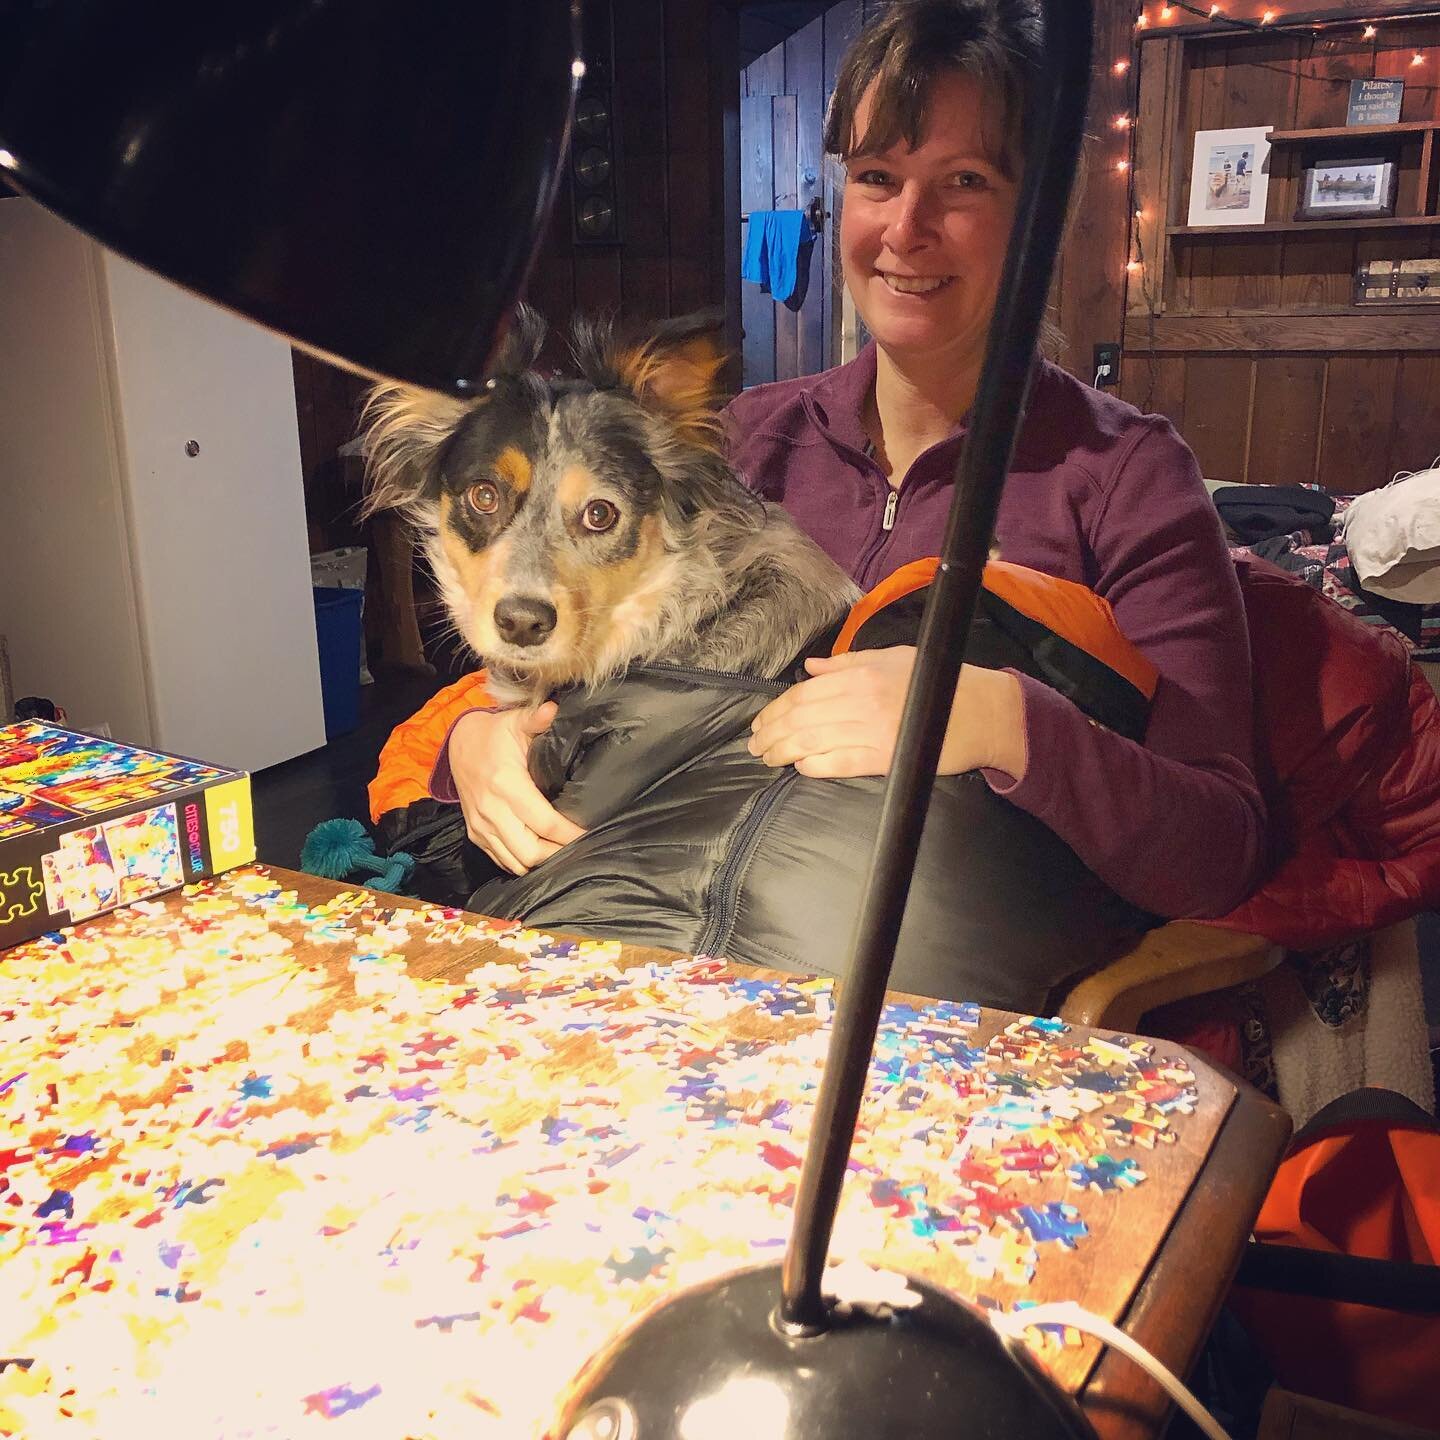 Jen Sarthou sits at a table working on a jigsaw puzzle with her dog Shasta